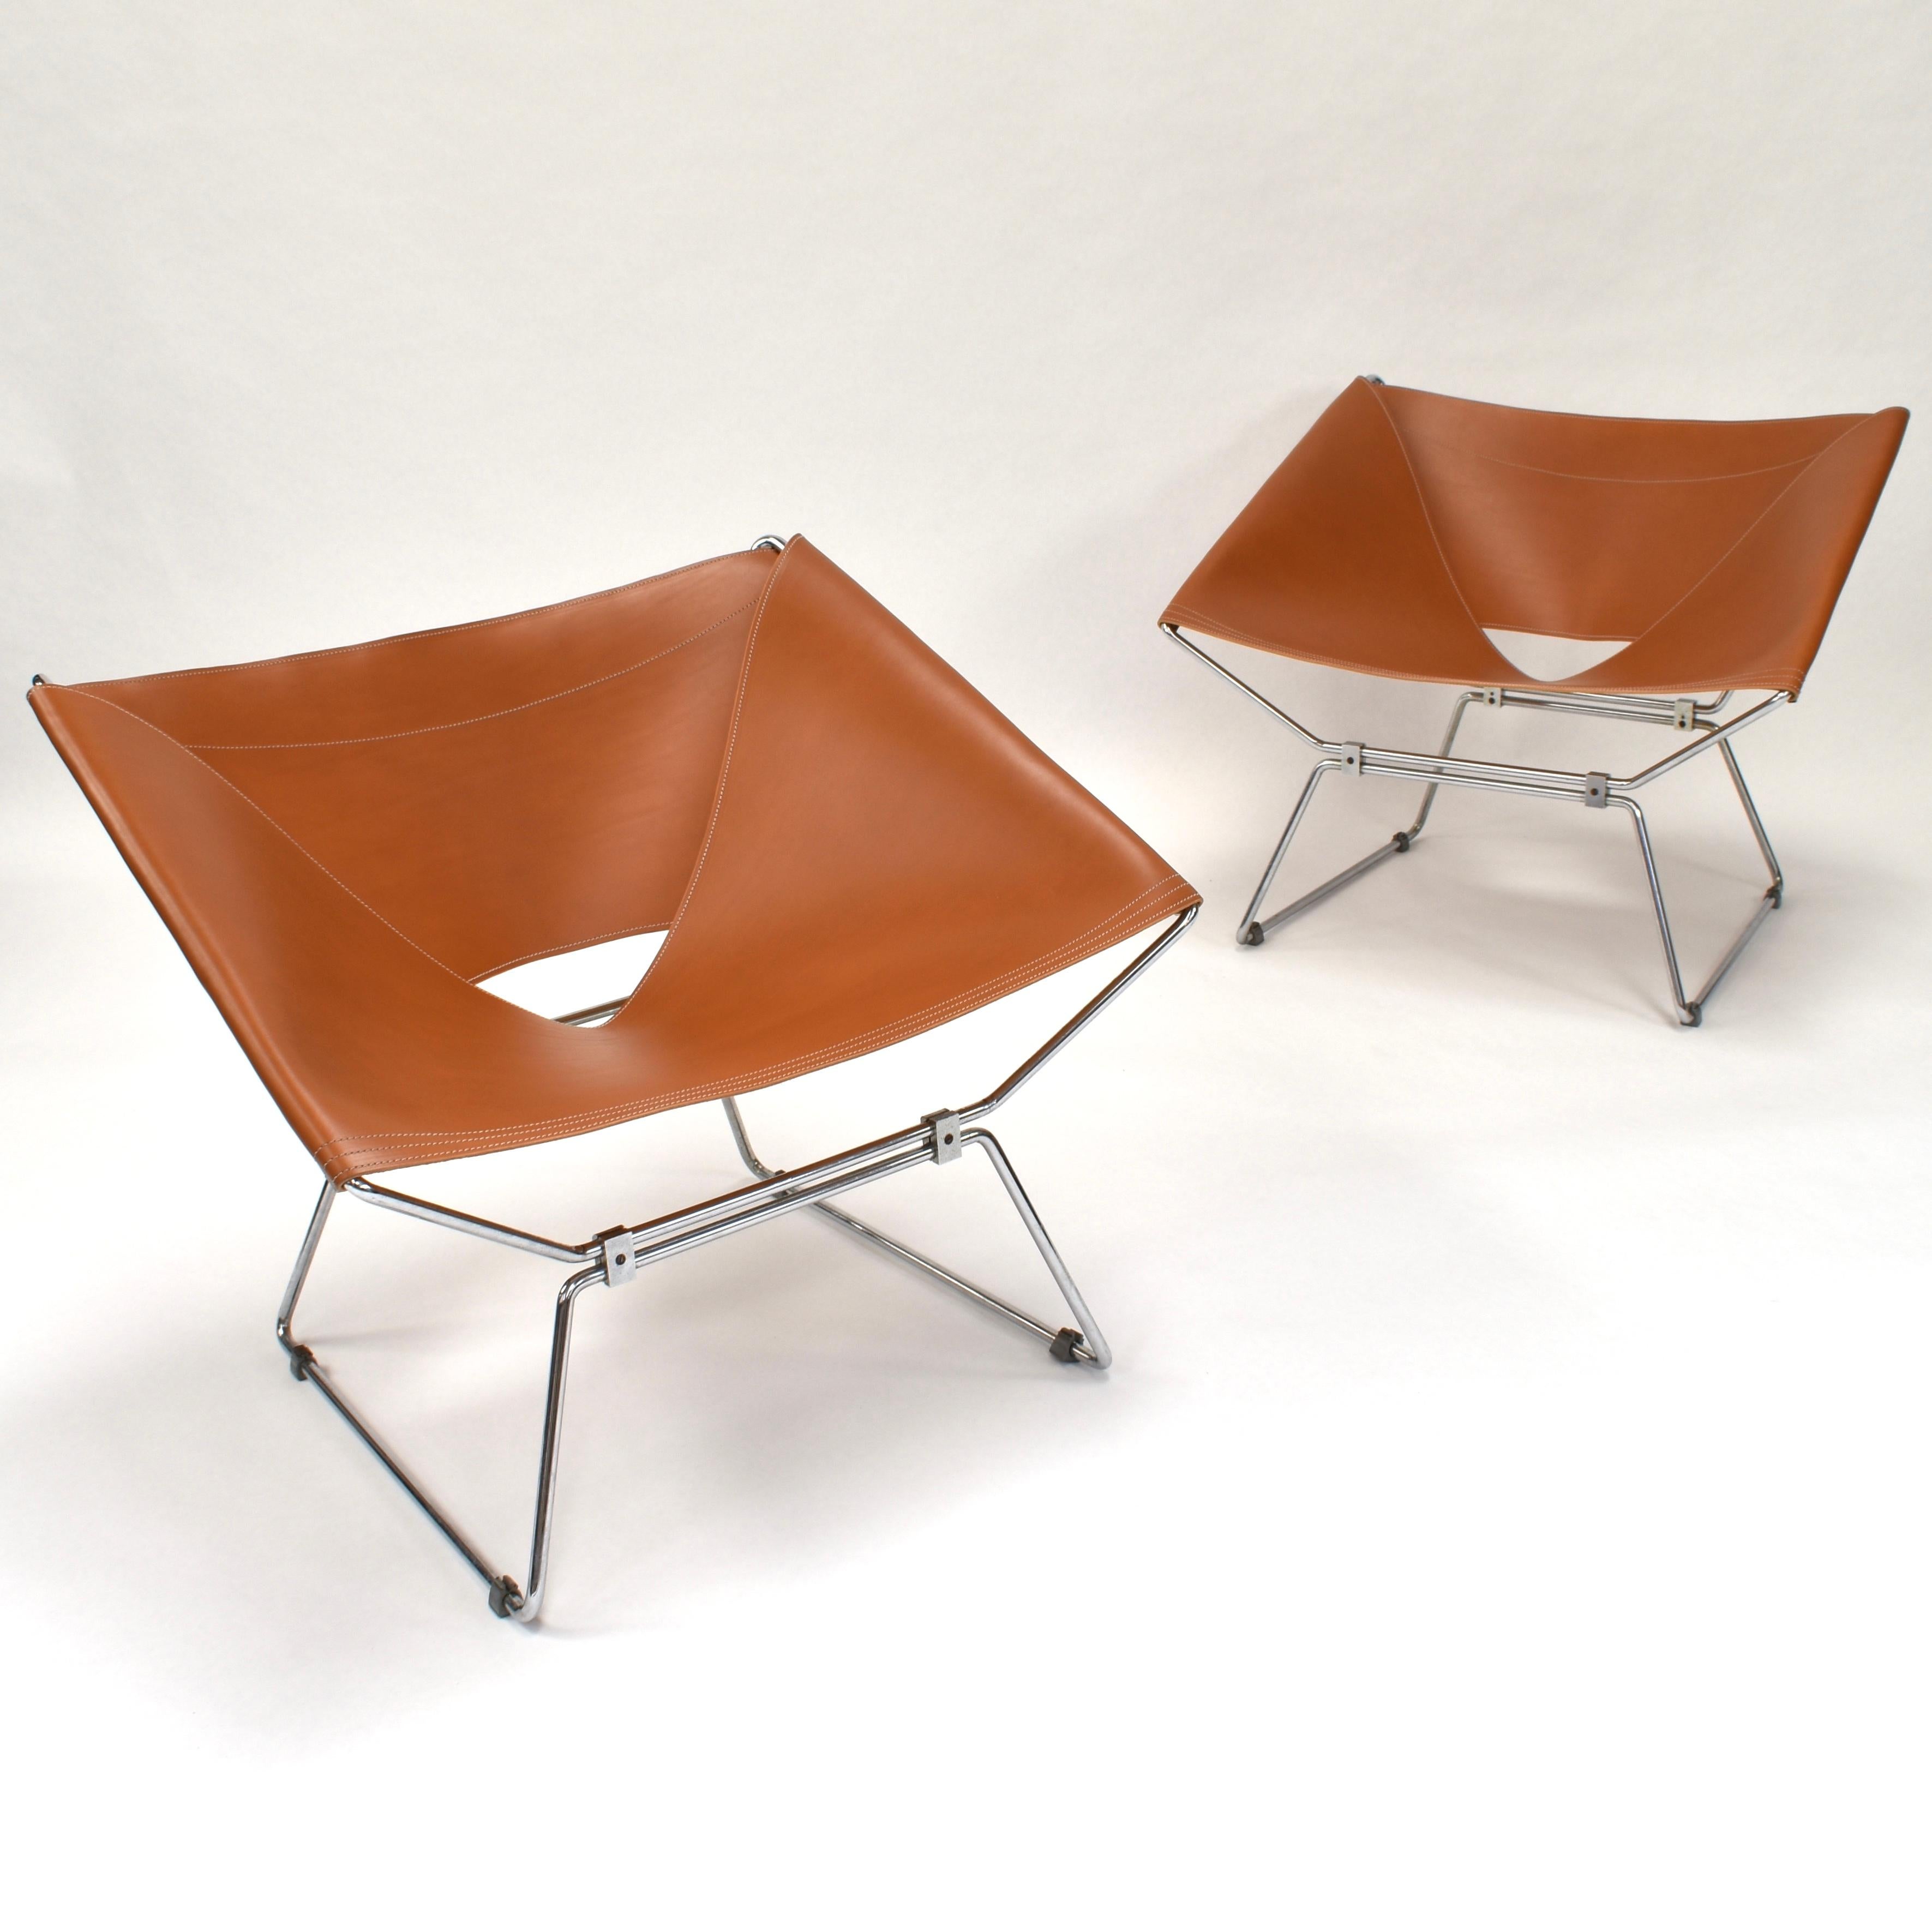 One chair available.
Very rare AP-14 butterfly chair designed by Pierre Paulin for A. Polak in 1955. The chairs are also known as ‘Anneau’ chairs.
The chair has beautiful new saddle leather made with extreme high quality